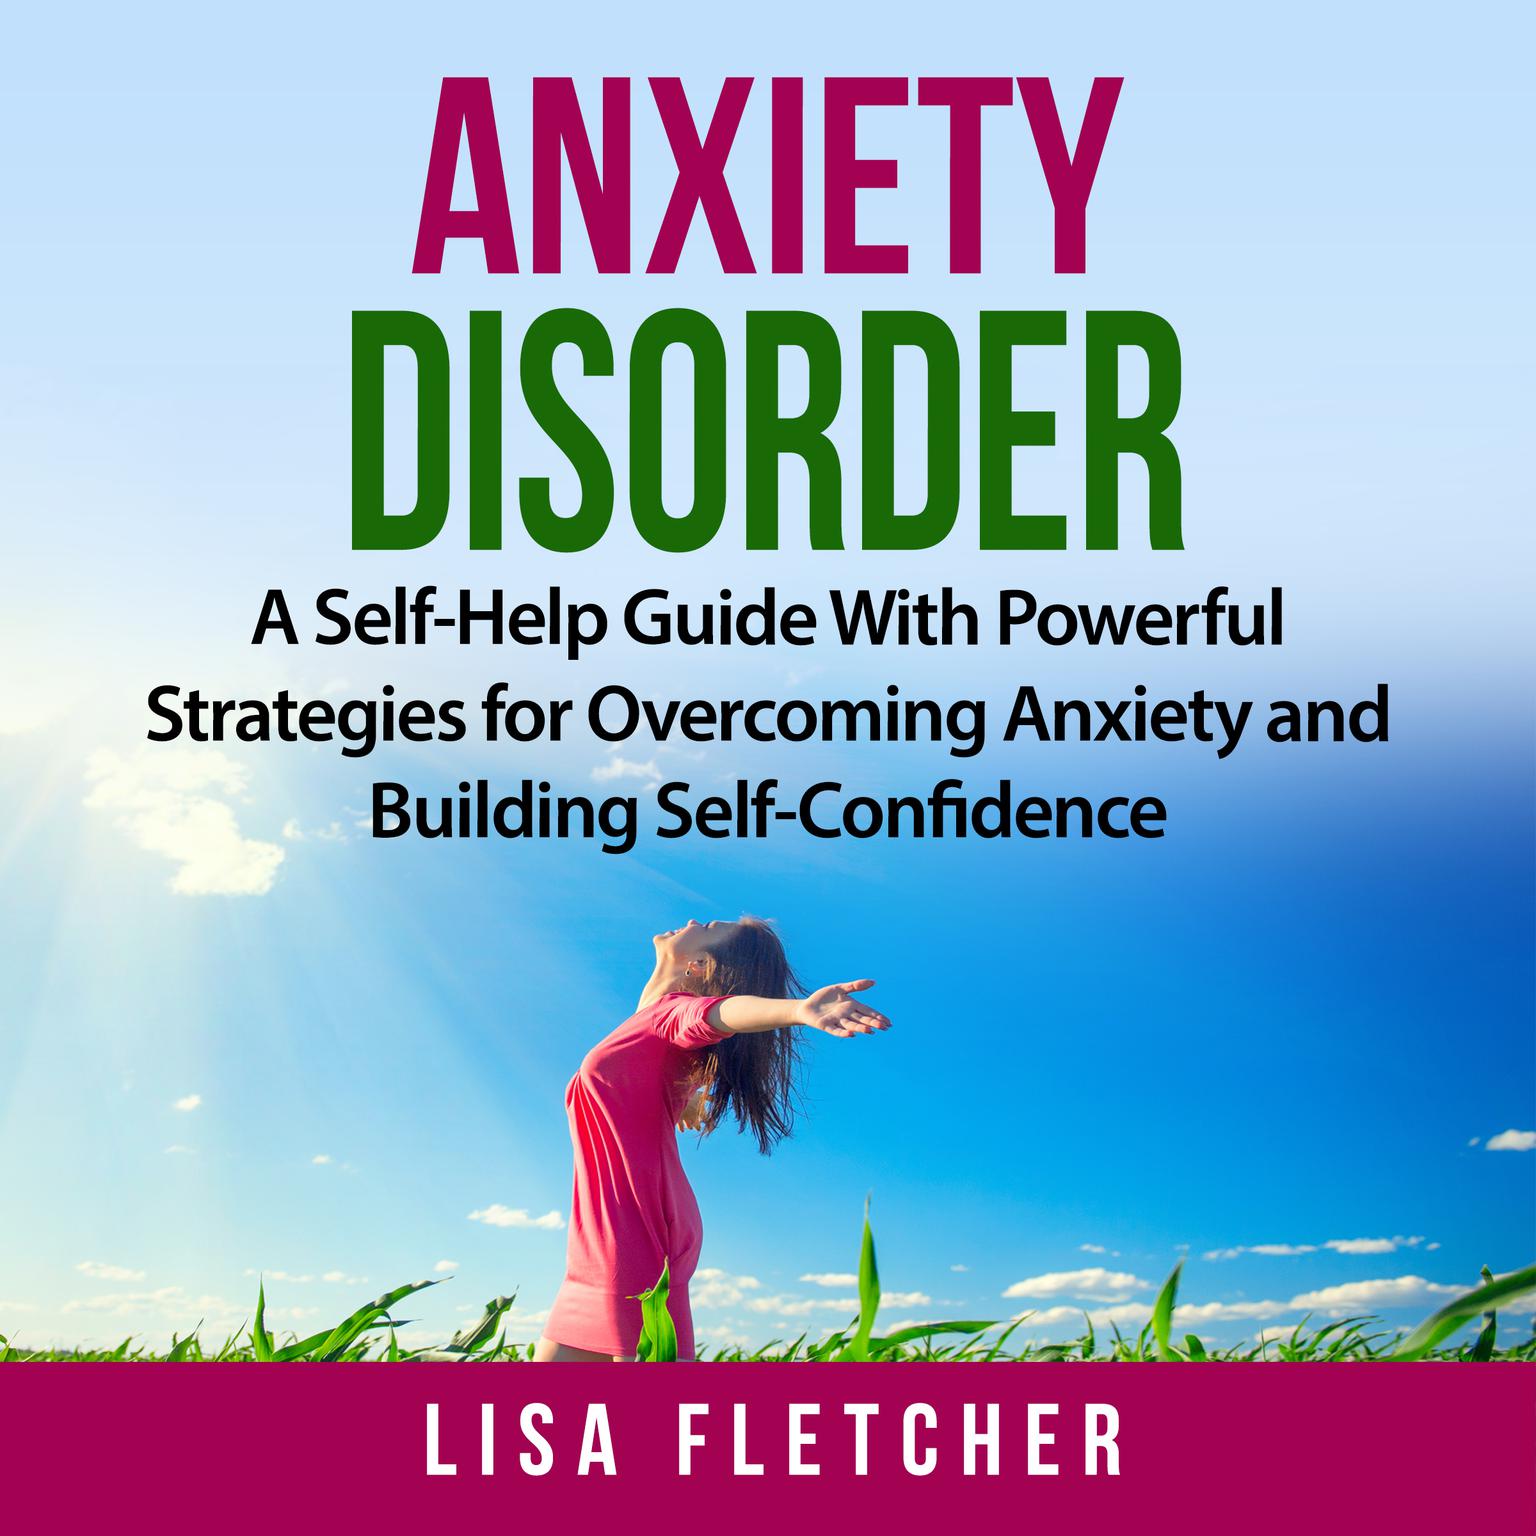 Anxiety Disorder: A Self-Help Guide With Powerful Strategies for Overcoming Anxiety and Building Self-Confidence Audiobook, by Lisa Fletcher